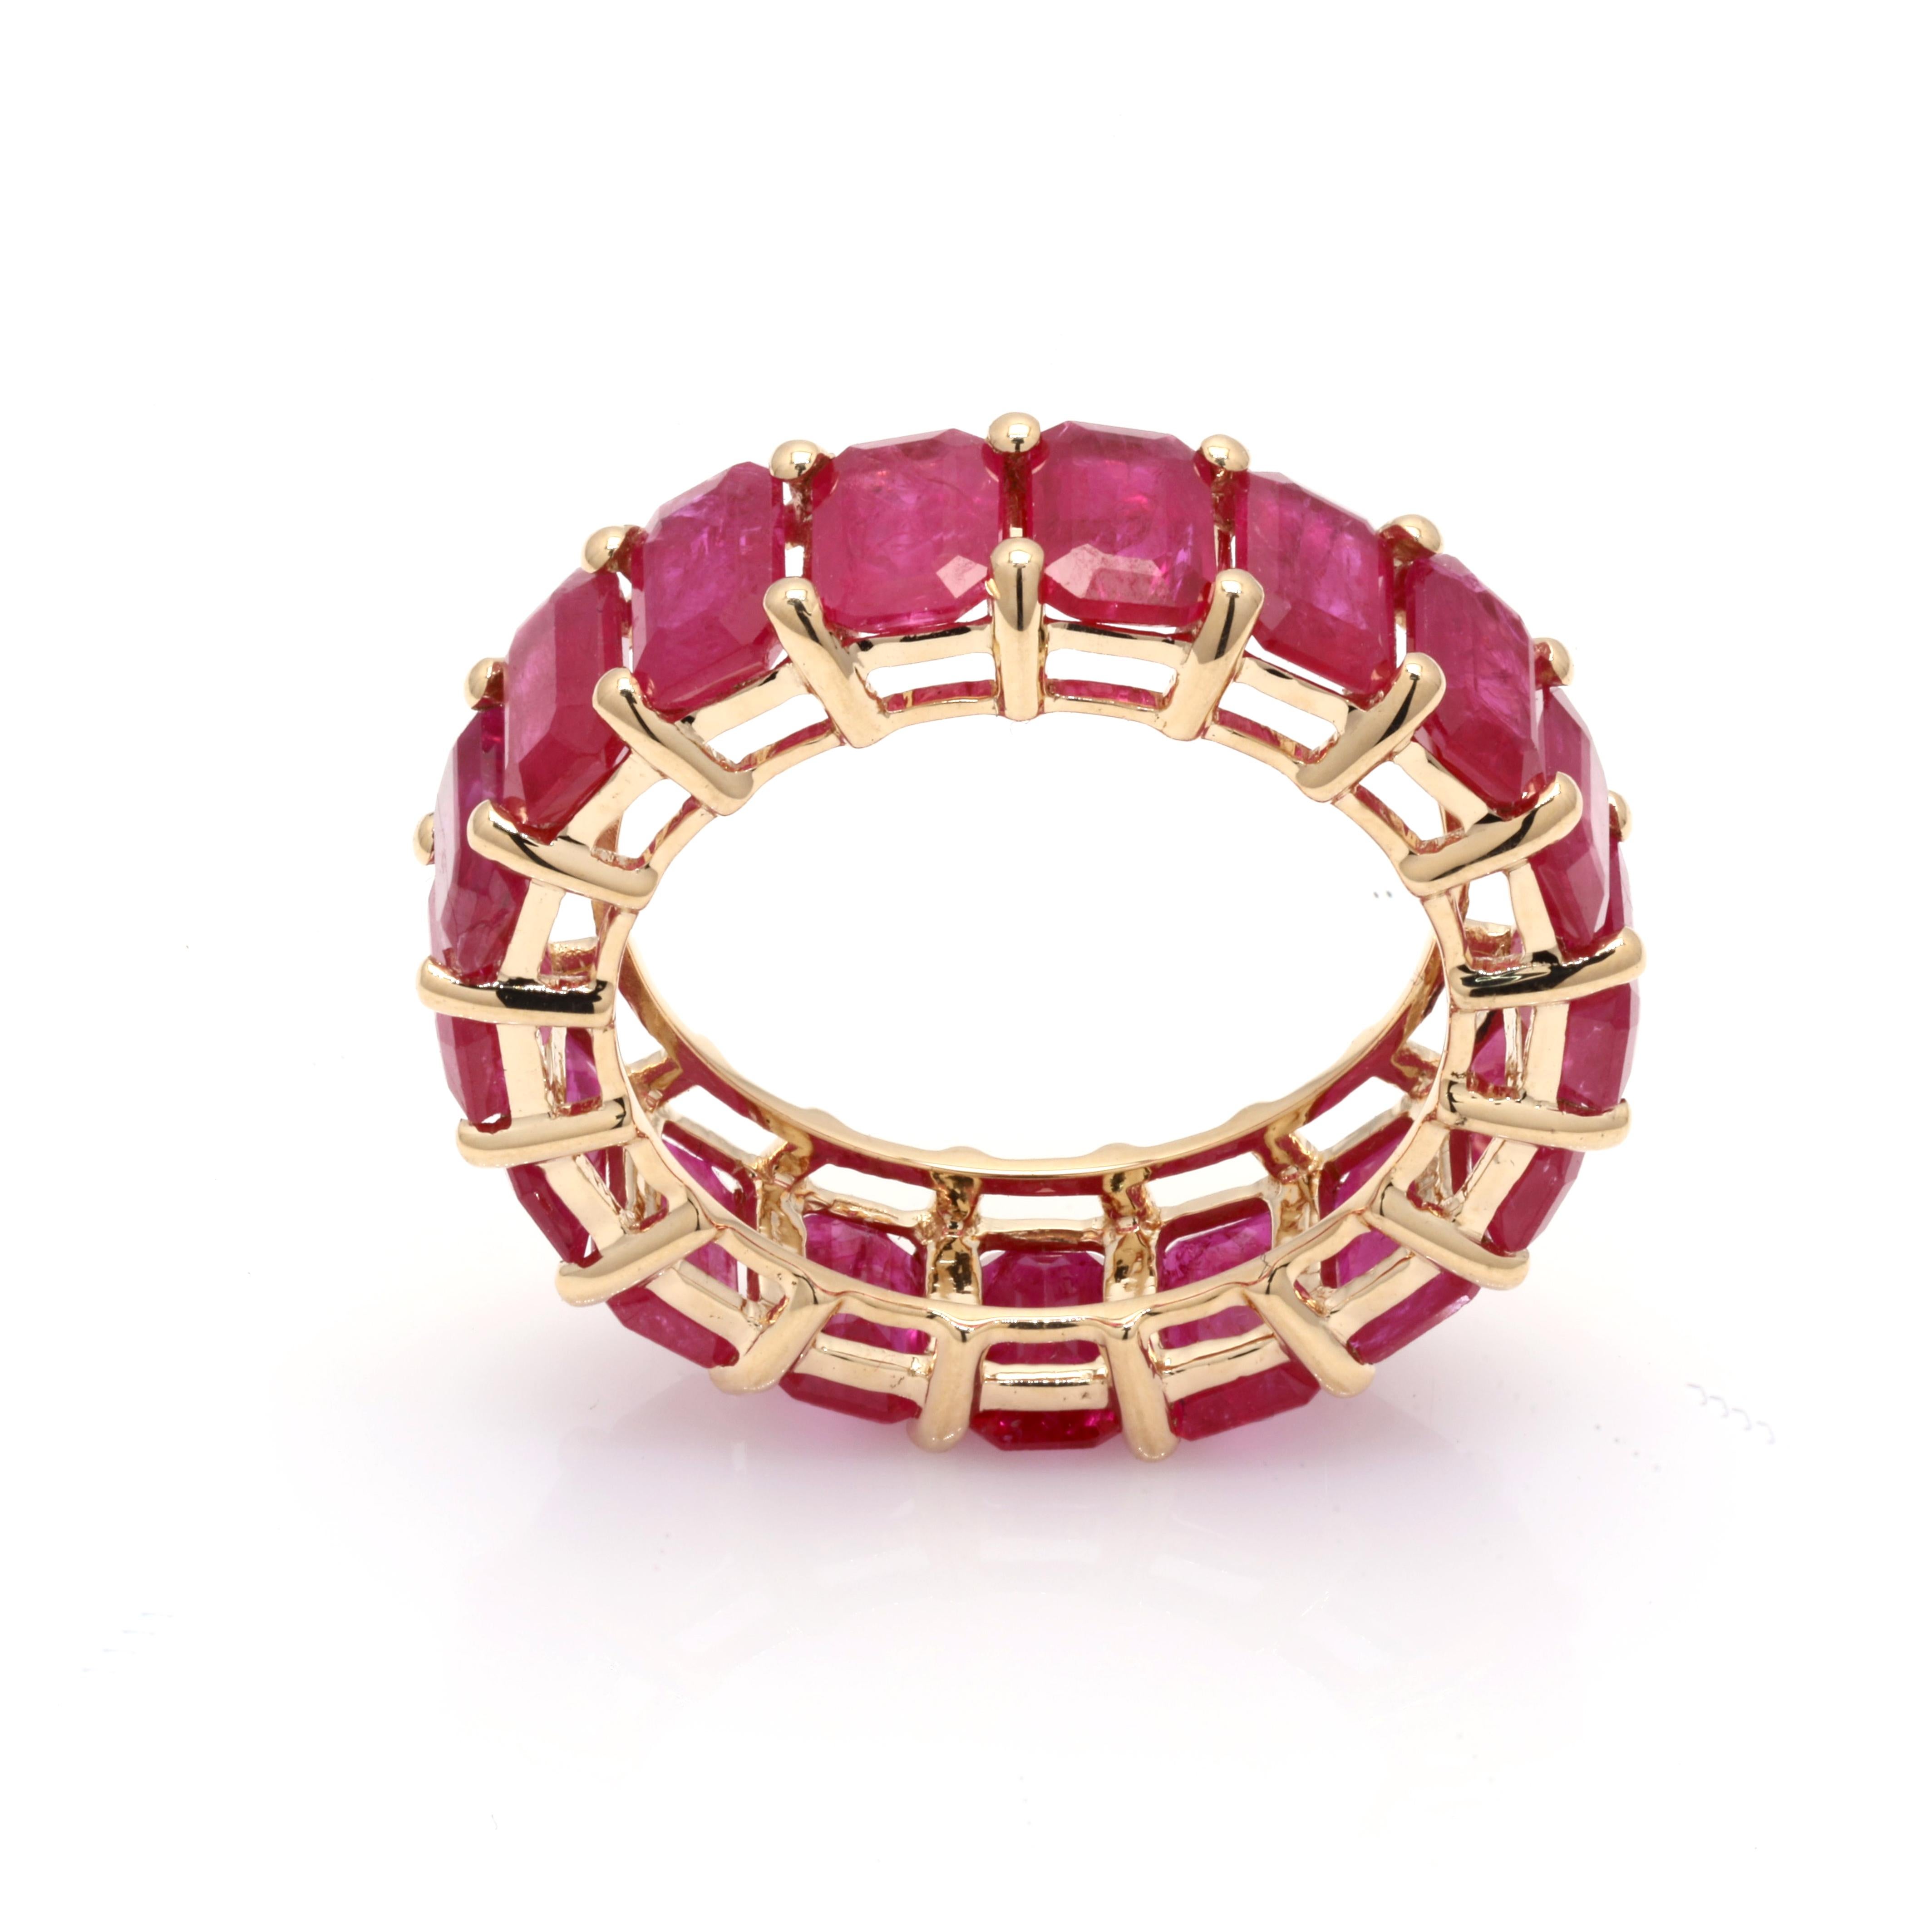 For Sale:  Magnificent 10.91 ct Ruby Eternity Band Ring 14k Yellow Gold Gift for Her 4